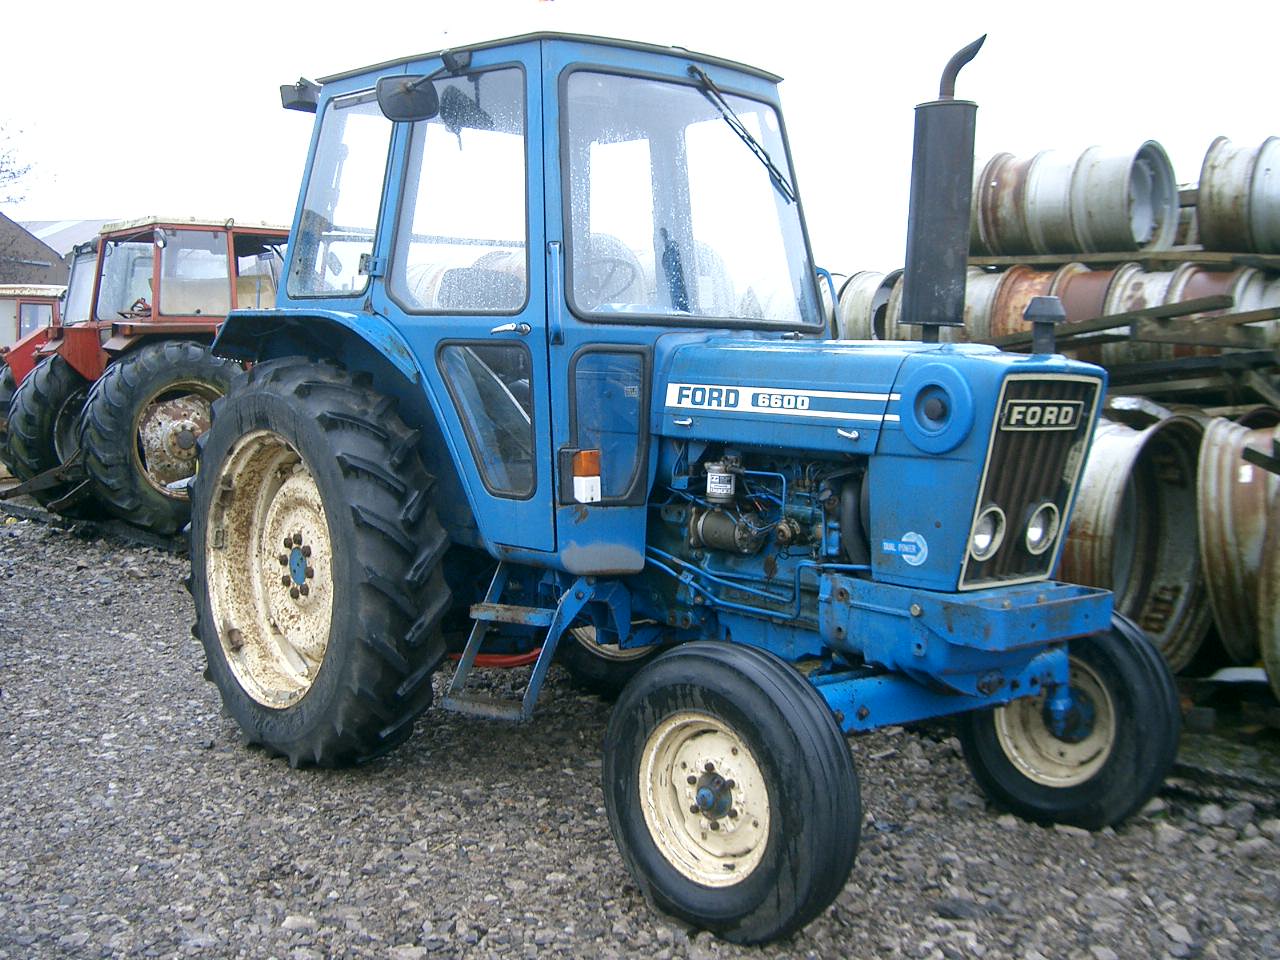 ford tractor 6600 8 10 from 67 votes ford tractor 6600 9 10 from 68 ...